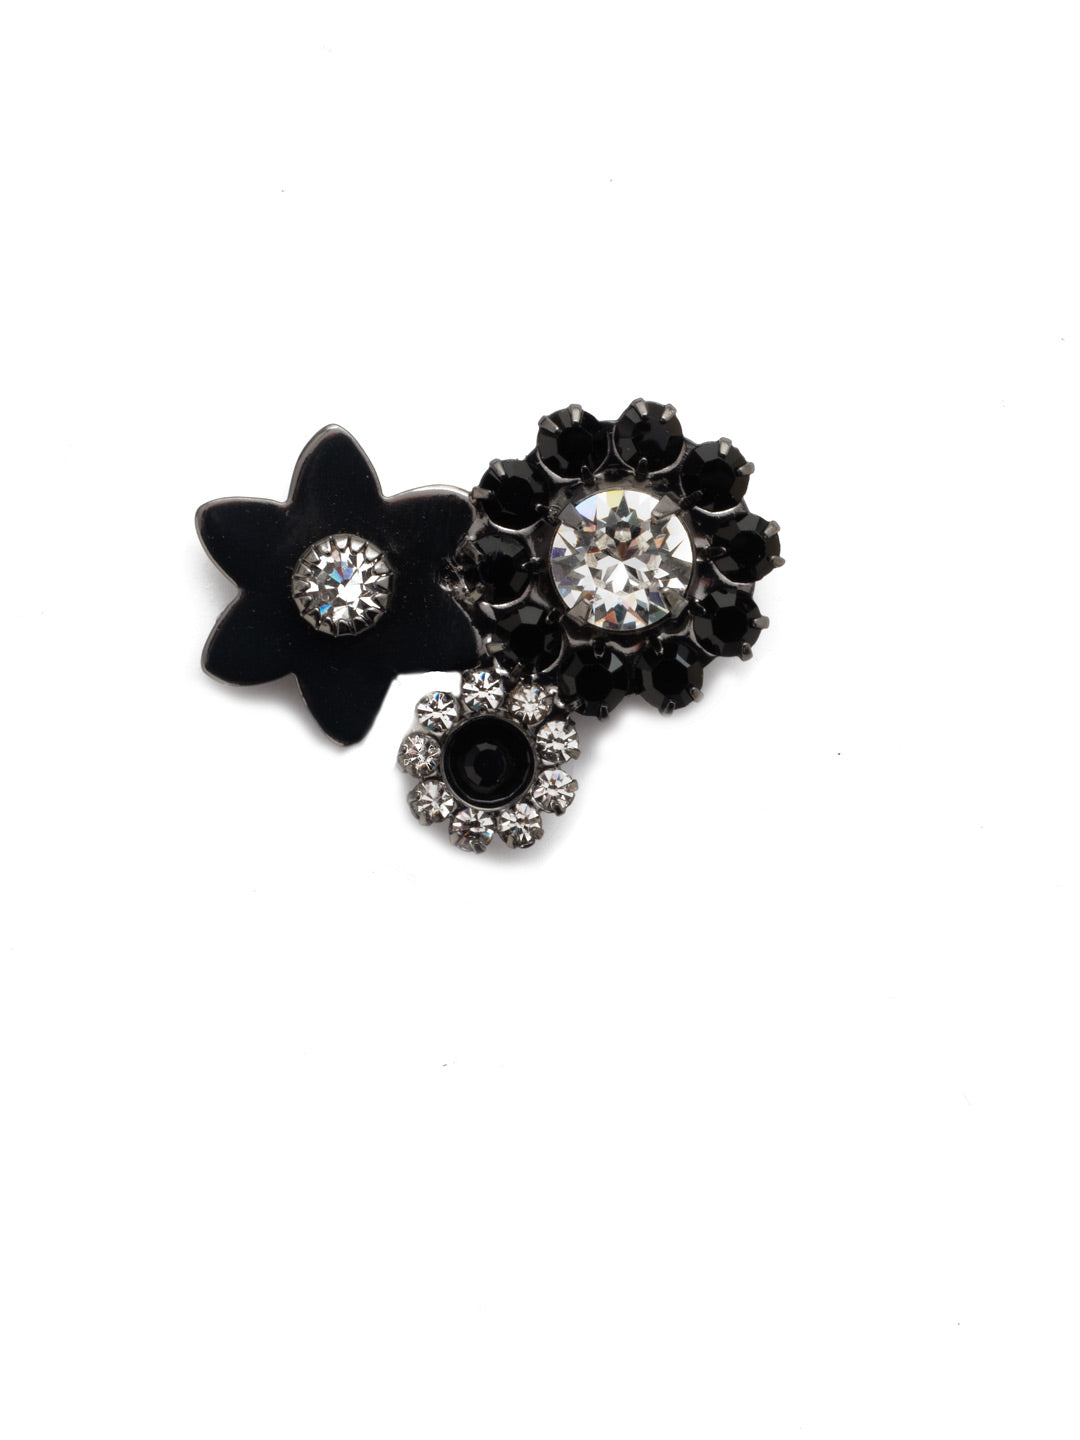 Astra Magnetic Charm - CHM11GMMMO - <p>Designed with gorgeous crystals, the muli-fuctional Magnetic charm will be perfect with any look. Securely fastening with a magnet, leaving no pin holes or damage to fabric. From Sorrelli's Midnight Moon collection in our Gun Metal finish.</p>